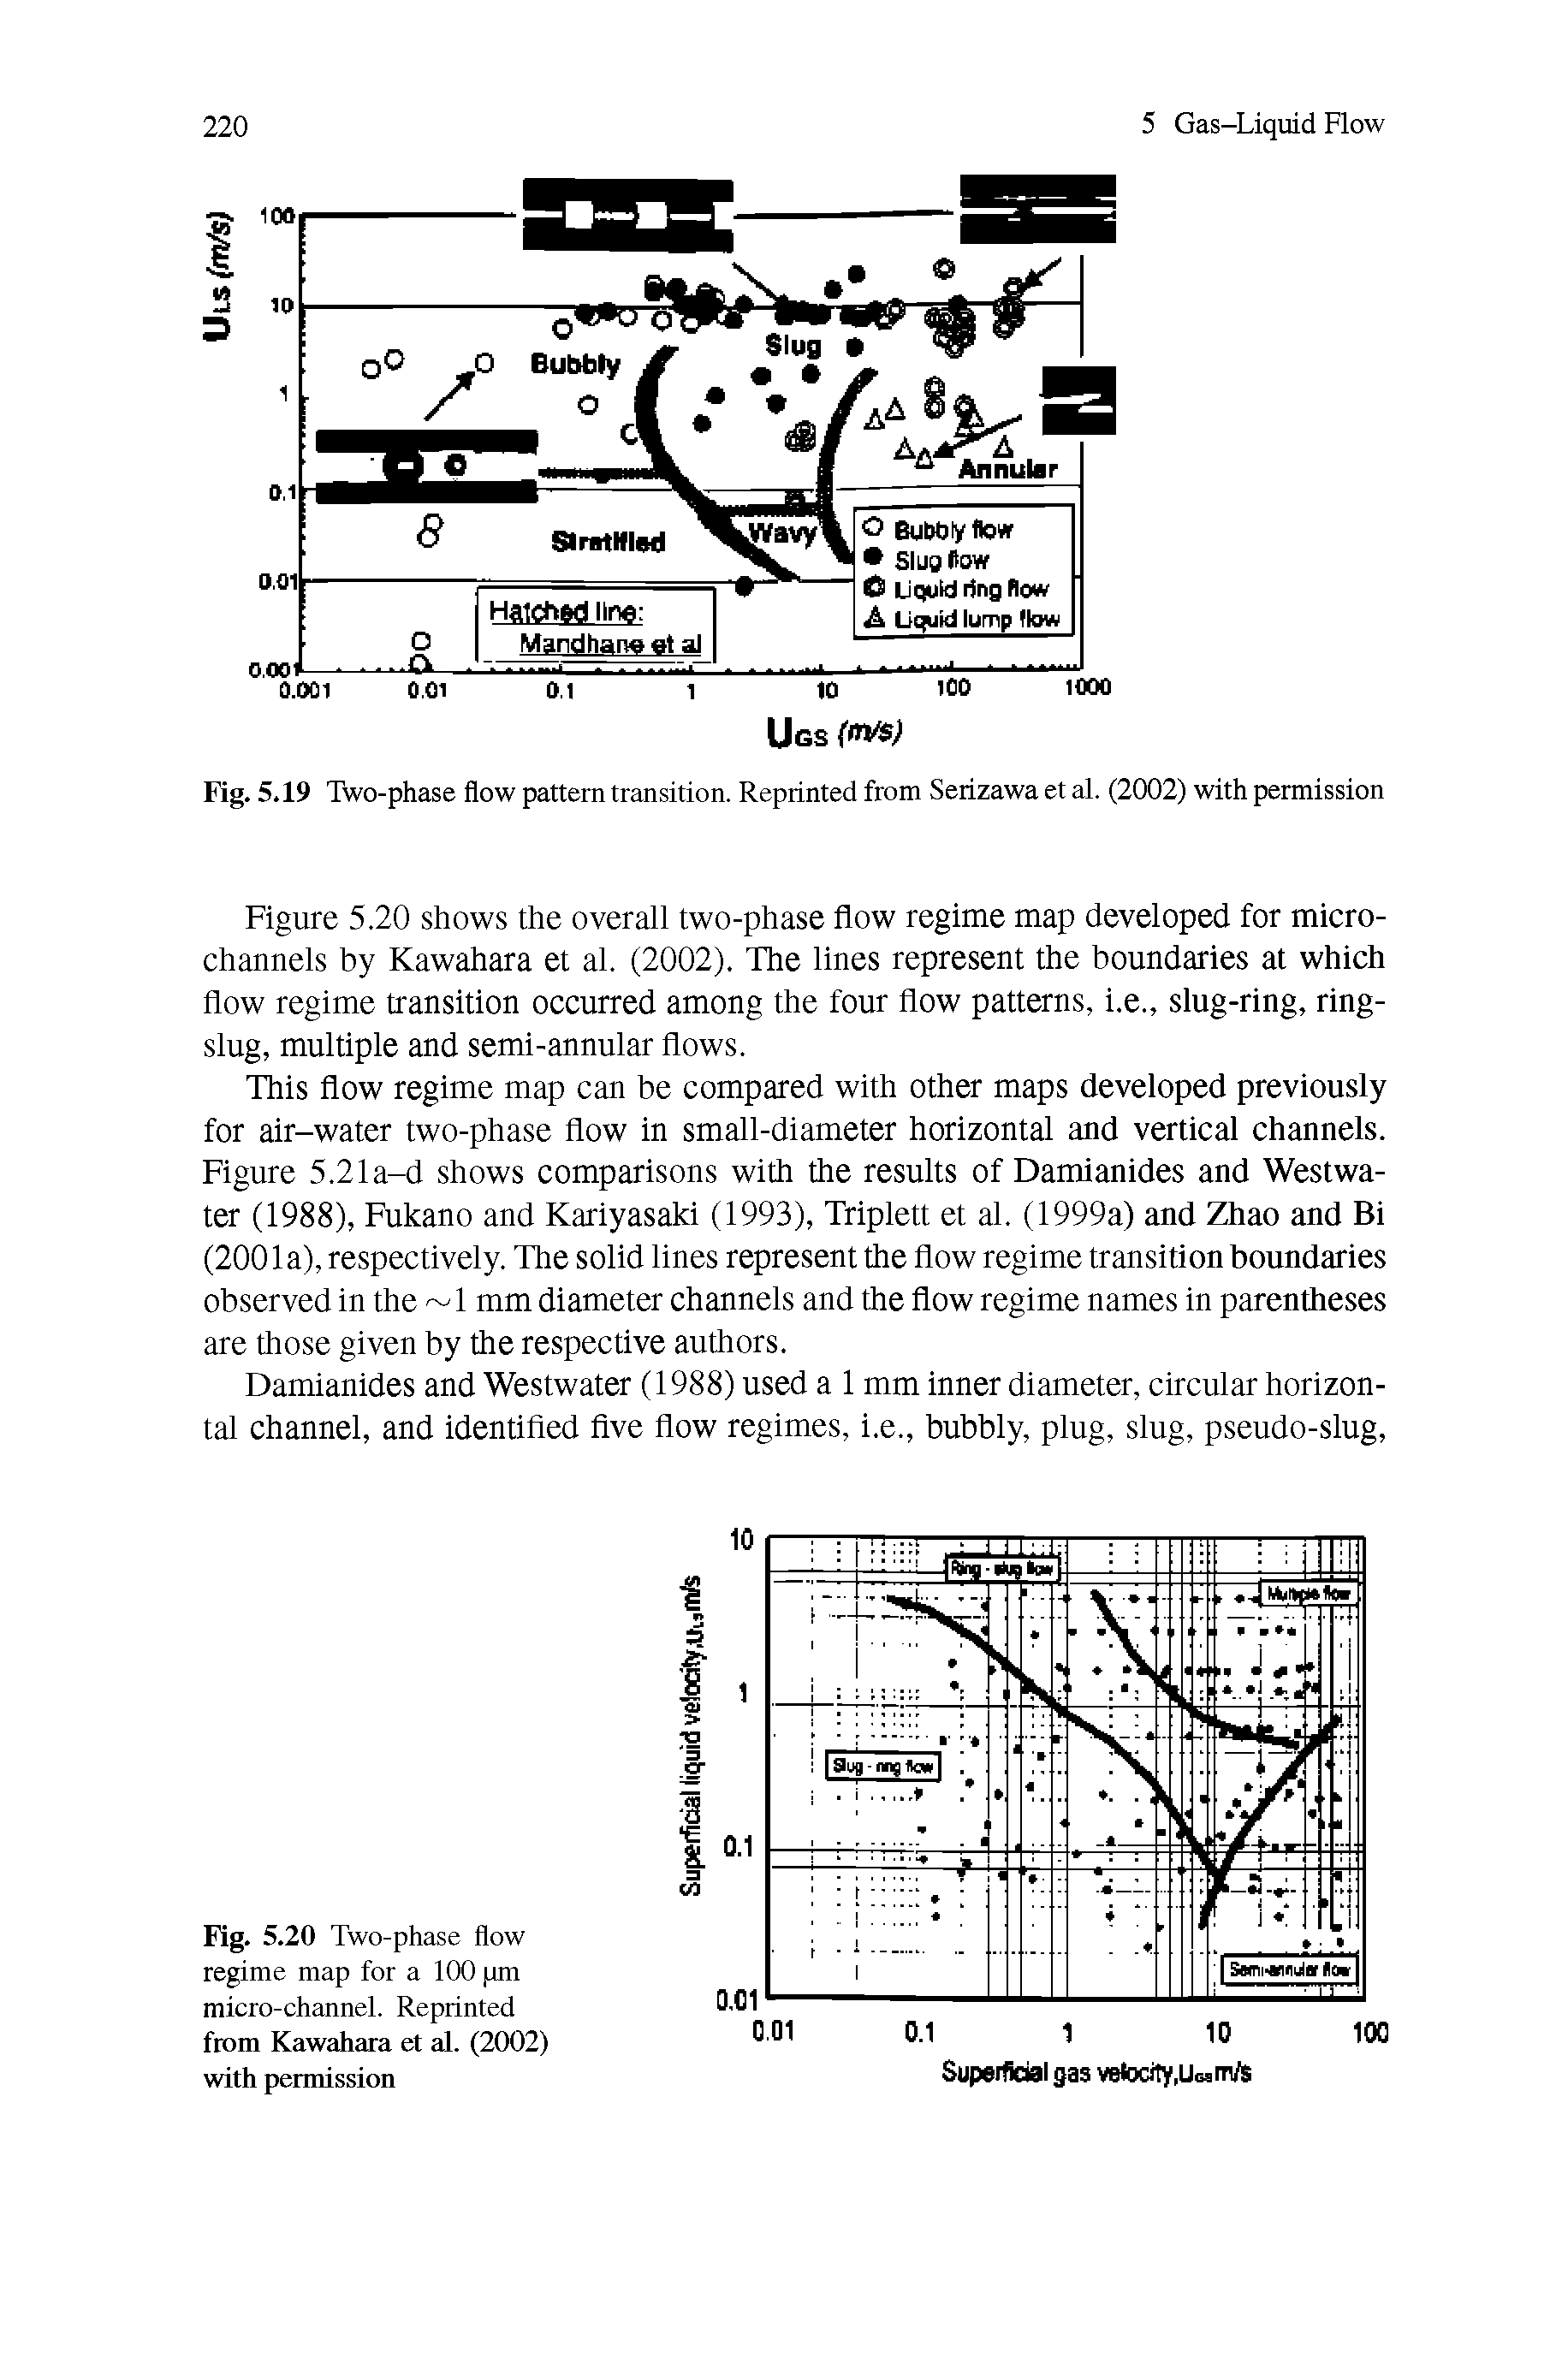 Fig. 5.20 Two-phase flow regime map for a 100 pm micro-channel. Reprinted from Kawahara et al. (2002) with permission...